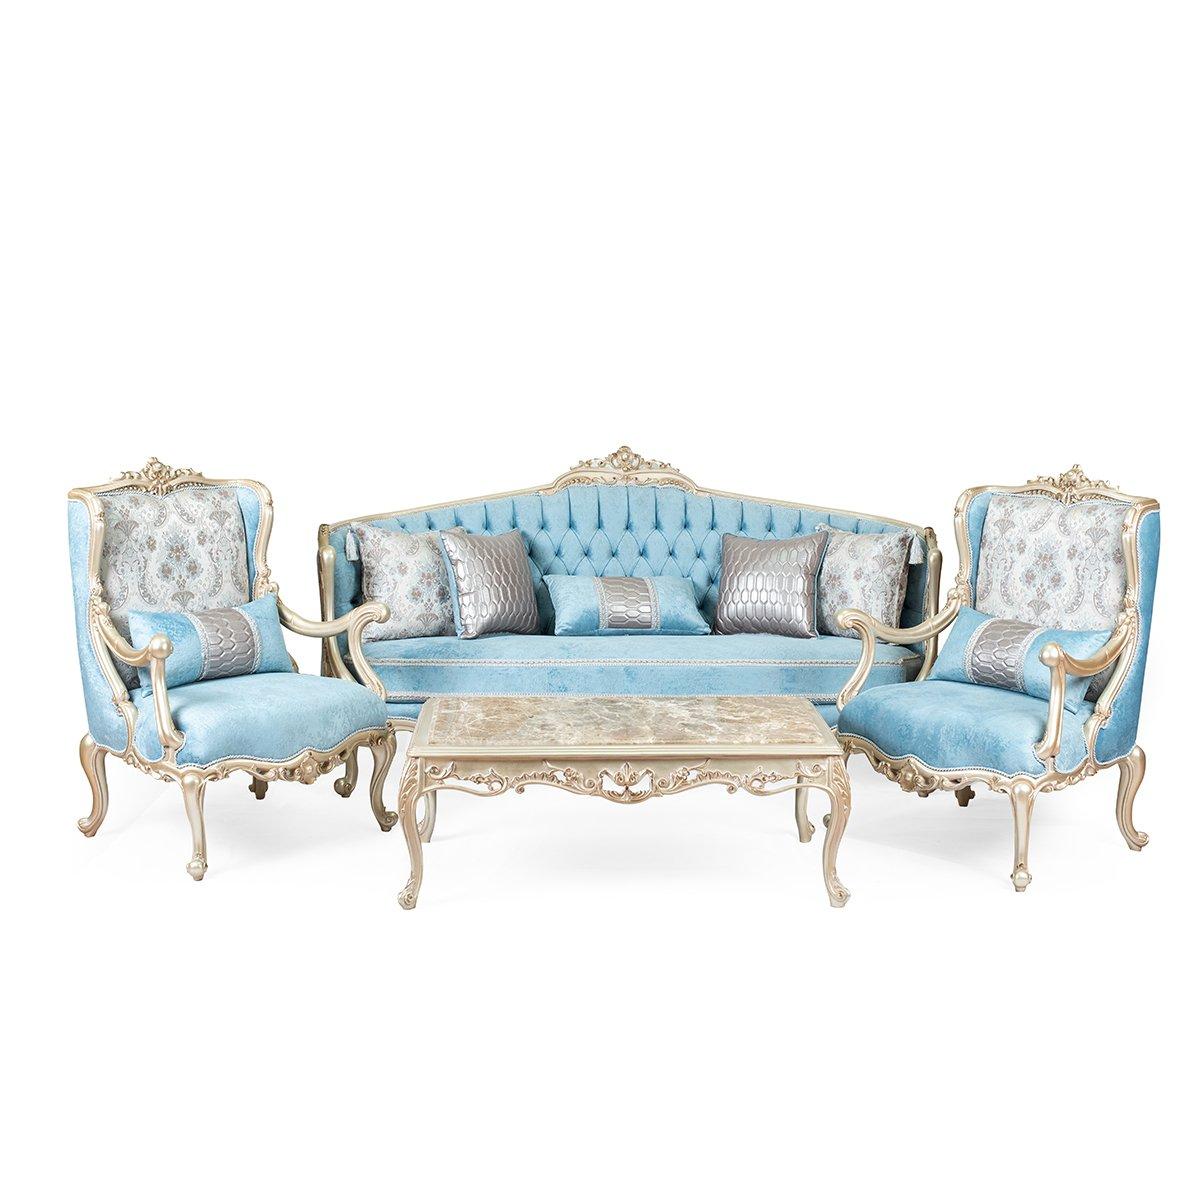 A beautiful Juliet style sitting room (5 PIECES), 20th century. 

Add a touch of wonder to your home with this eye watering piece of delight living room. The four-piece art is upholstered with dense quality sponge mounting its beechwood. This